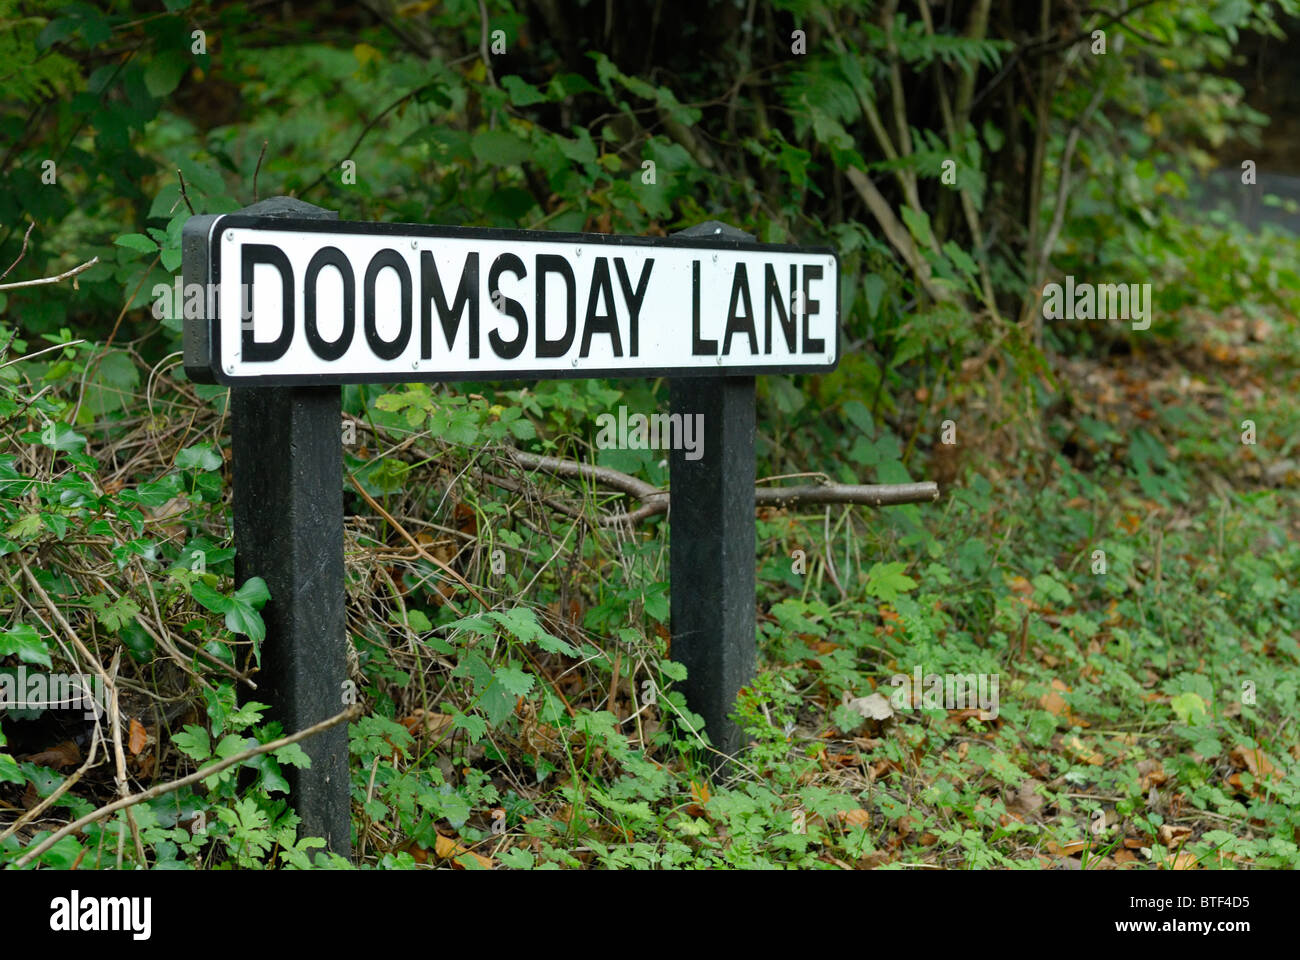 A signpost for Doomsday Lane near Horsham in West Sussex, England. Stock Photo